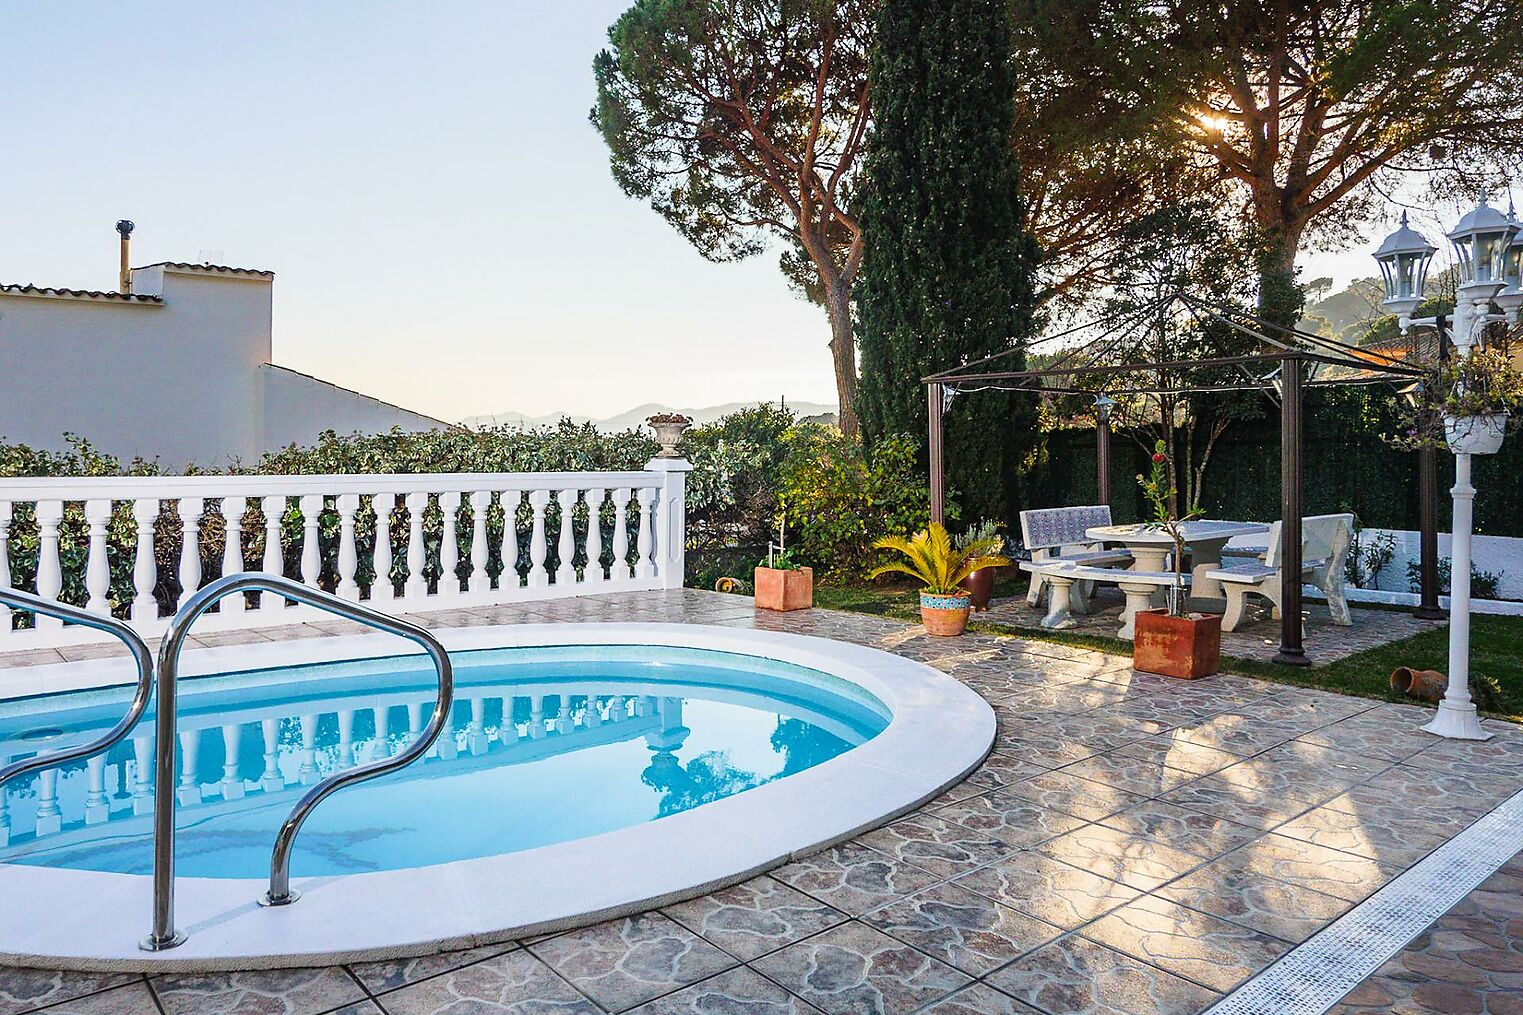 Single storey detached villa with pool.